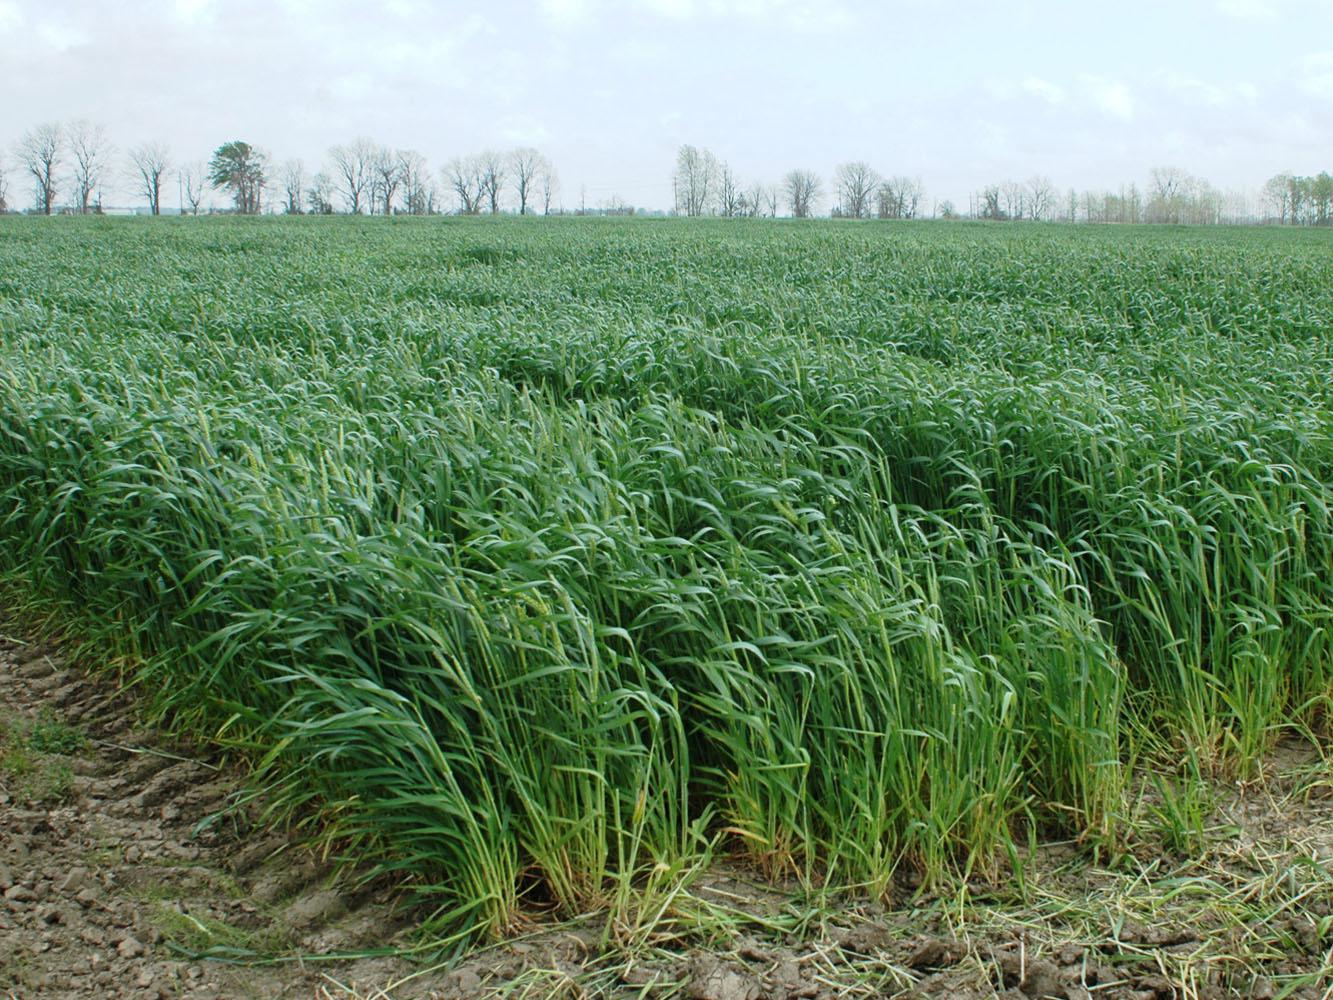 Wheat, such as this growing in Washington County, was pushed ahead of schedule by a warm winter that presented many challenges for the crop to overcome. (Photo by MSU Delta Research and Extension Center/Rebekah Ray)